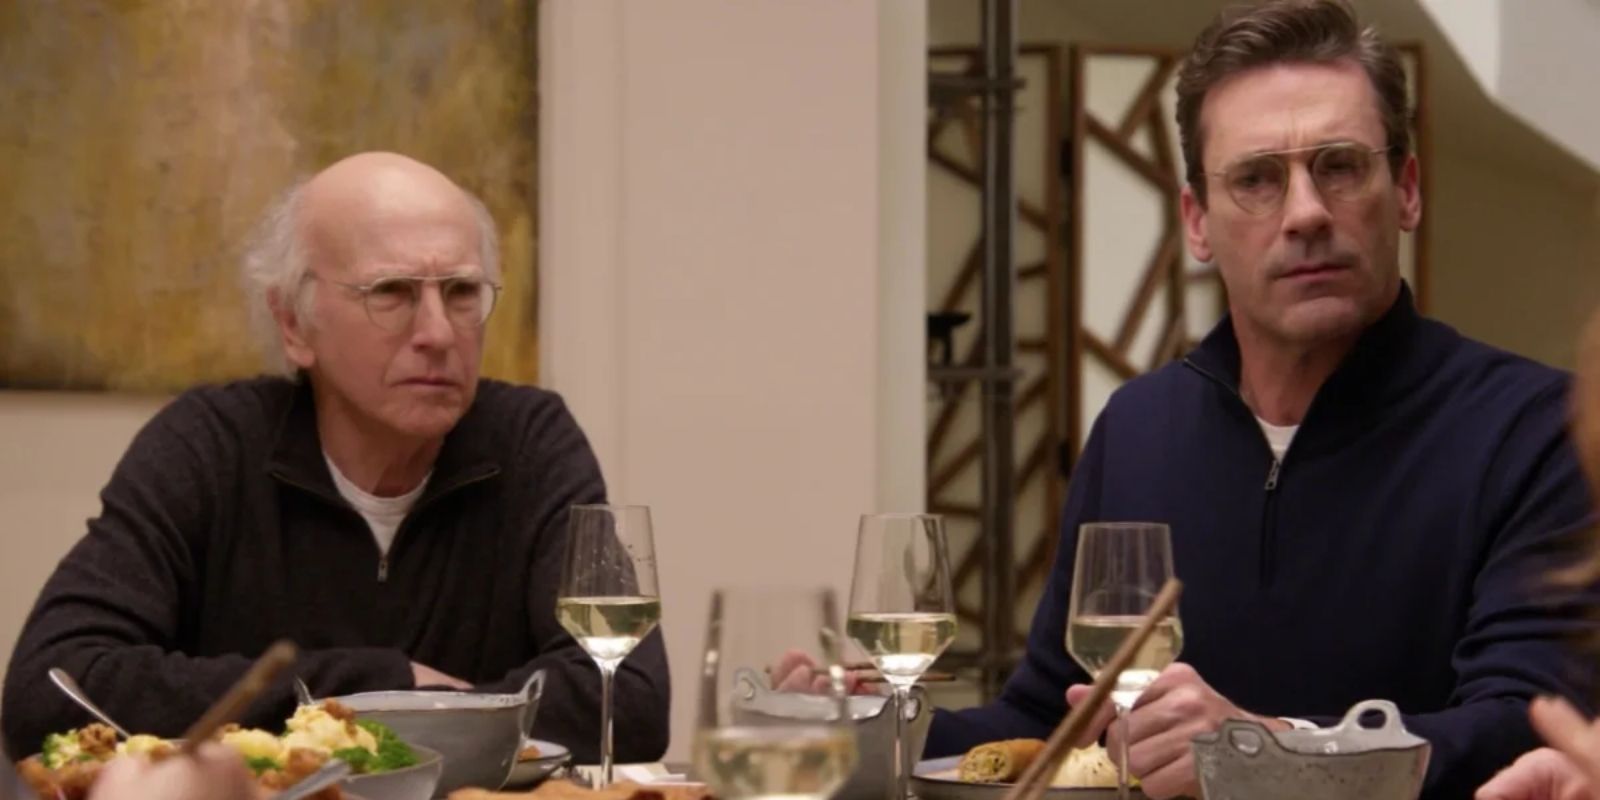 Jon Hamm has dinner with Larry and his friends in Curb Your Enthusiasm